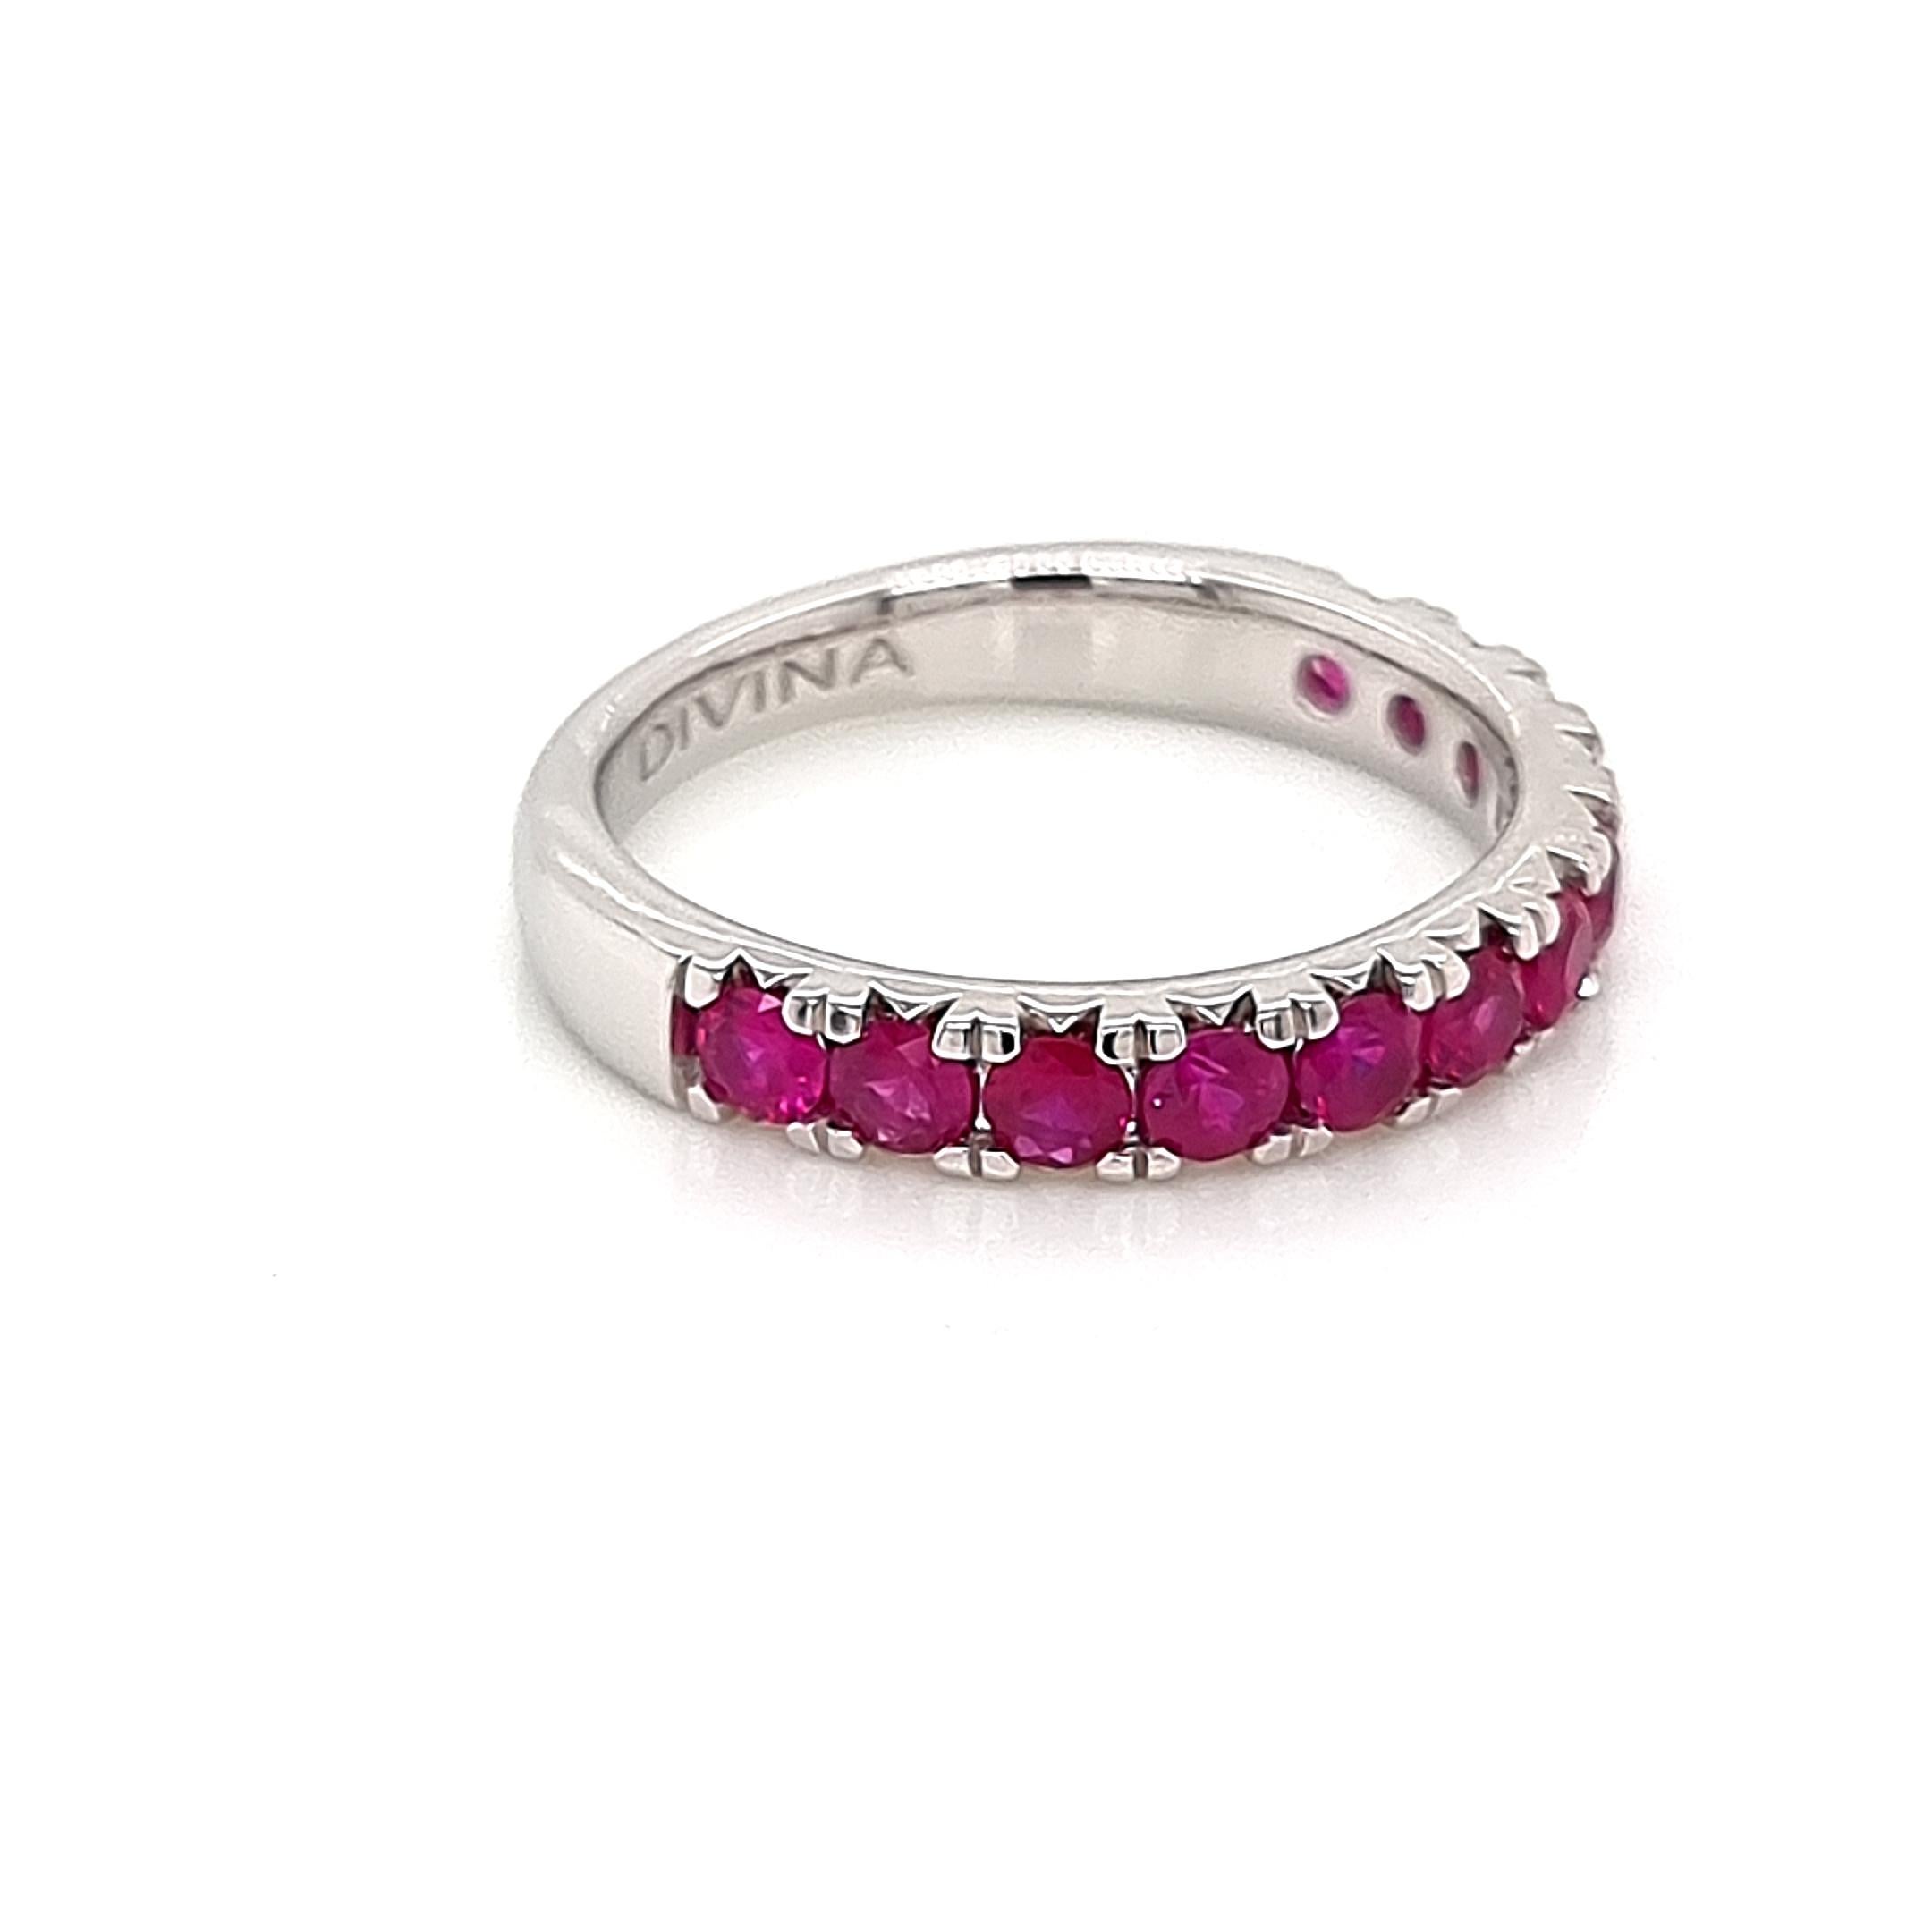 Introducing the Platinum Half-Shank Ring Band with Rubies, a captivating blend of elegance and vibrance. This exquisite piece of jewelry is crafted with the utmost precision and artistry to create a stunning accessory that will leave a lasting